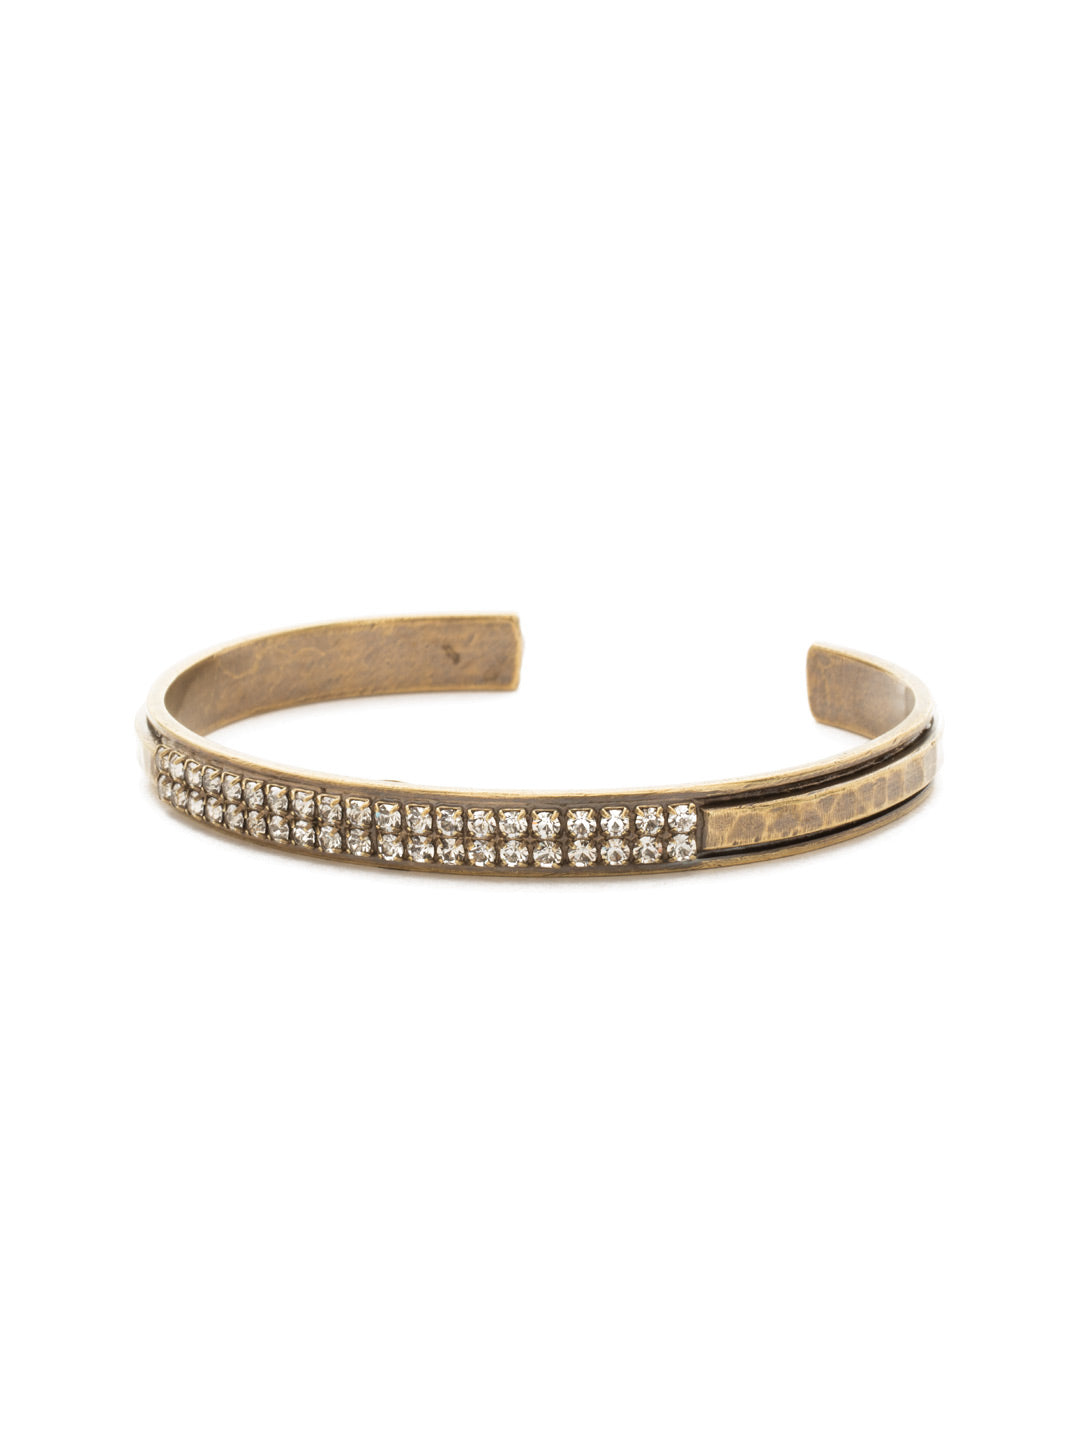 All Lined Up Cuff Bracelet - BDW22AGCRY - Two lines of round crystals on a metal cuff creates this modern design From Sorrelli's Crystal collection in our Antique Gold-tone finish.